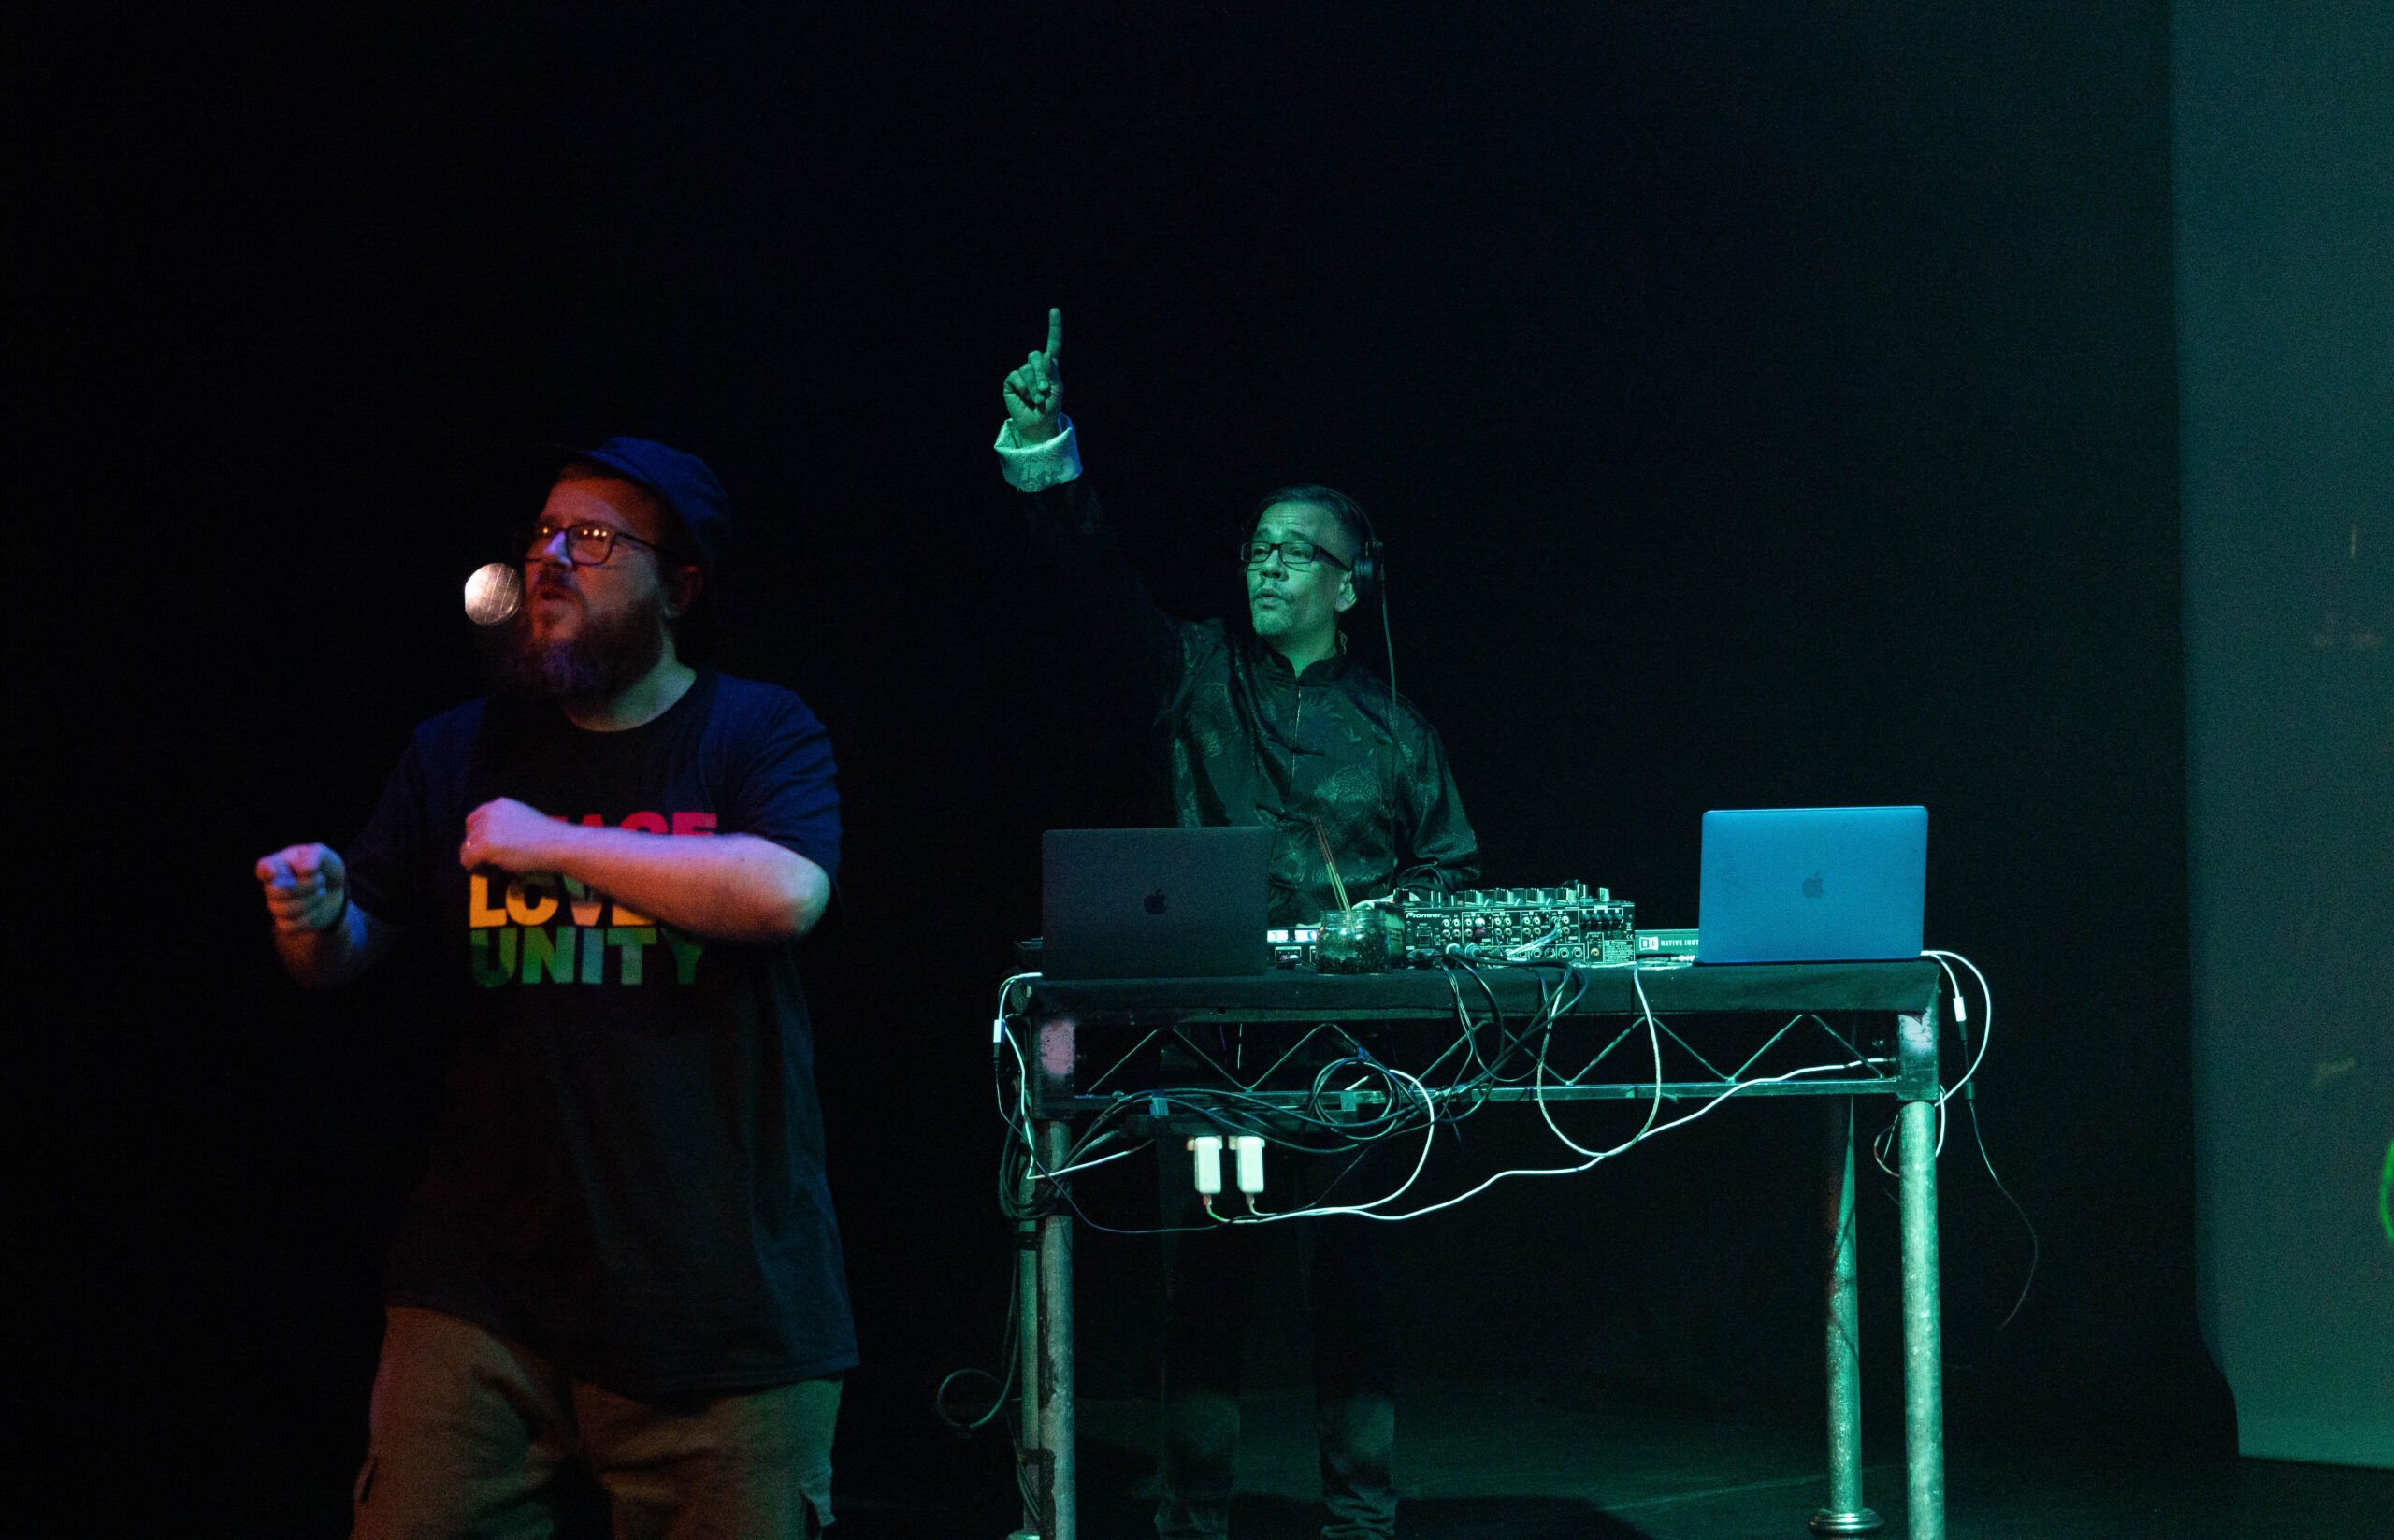 MC Geezer and Troi 'DJ Chinaman' Lee perform at the CRIPtic Pit Party in 2021. MC Geezer raps and signs on stage, while Troi Lee plays music from behind a desk, with his hand raised.